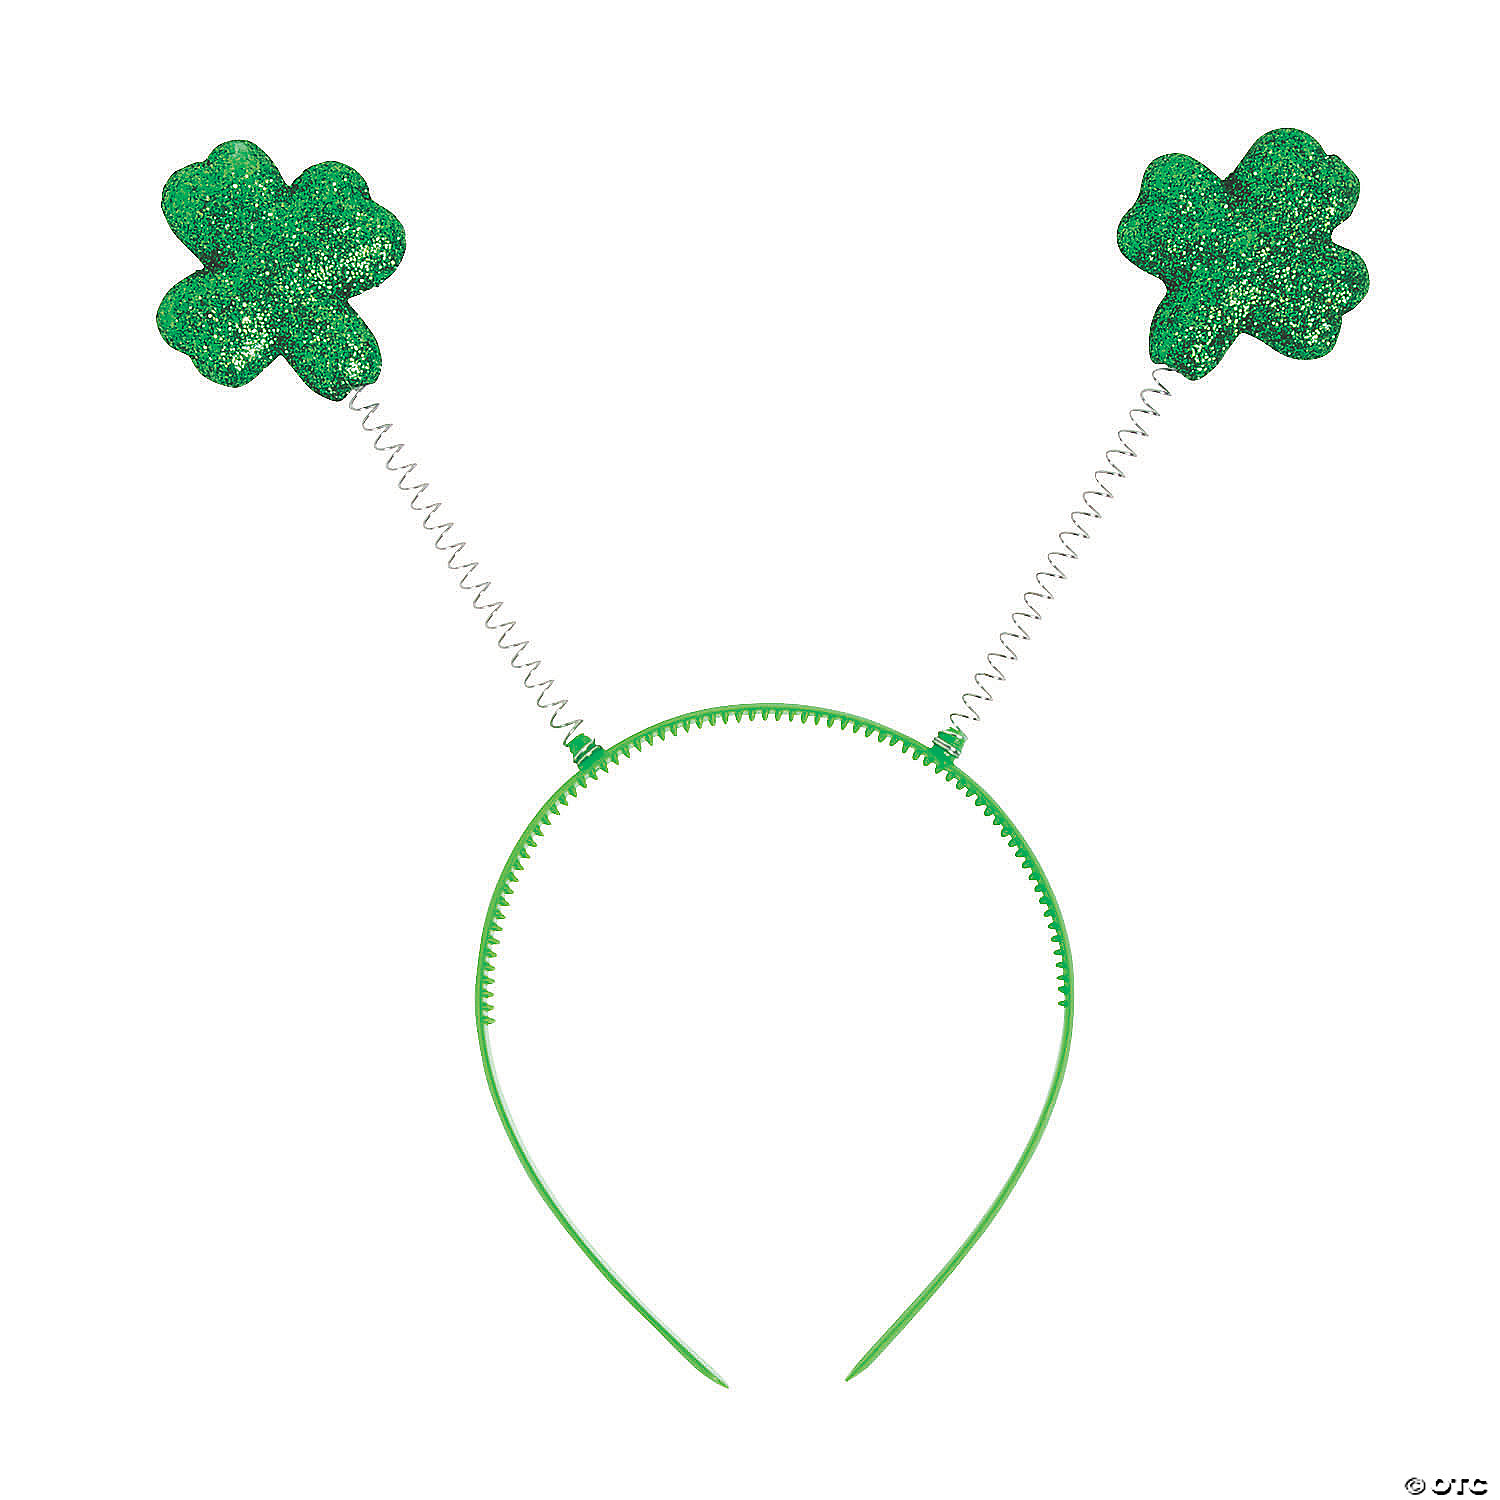 Irish Party Favors And Holiday Costume Accessories One Size Patricks Day Headbands Beistle 3 Piece Glittered Shamrock Head Boppers Happy St Green//Light Green